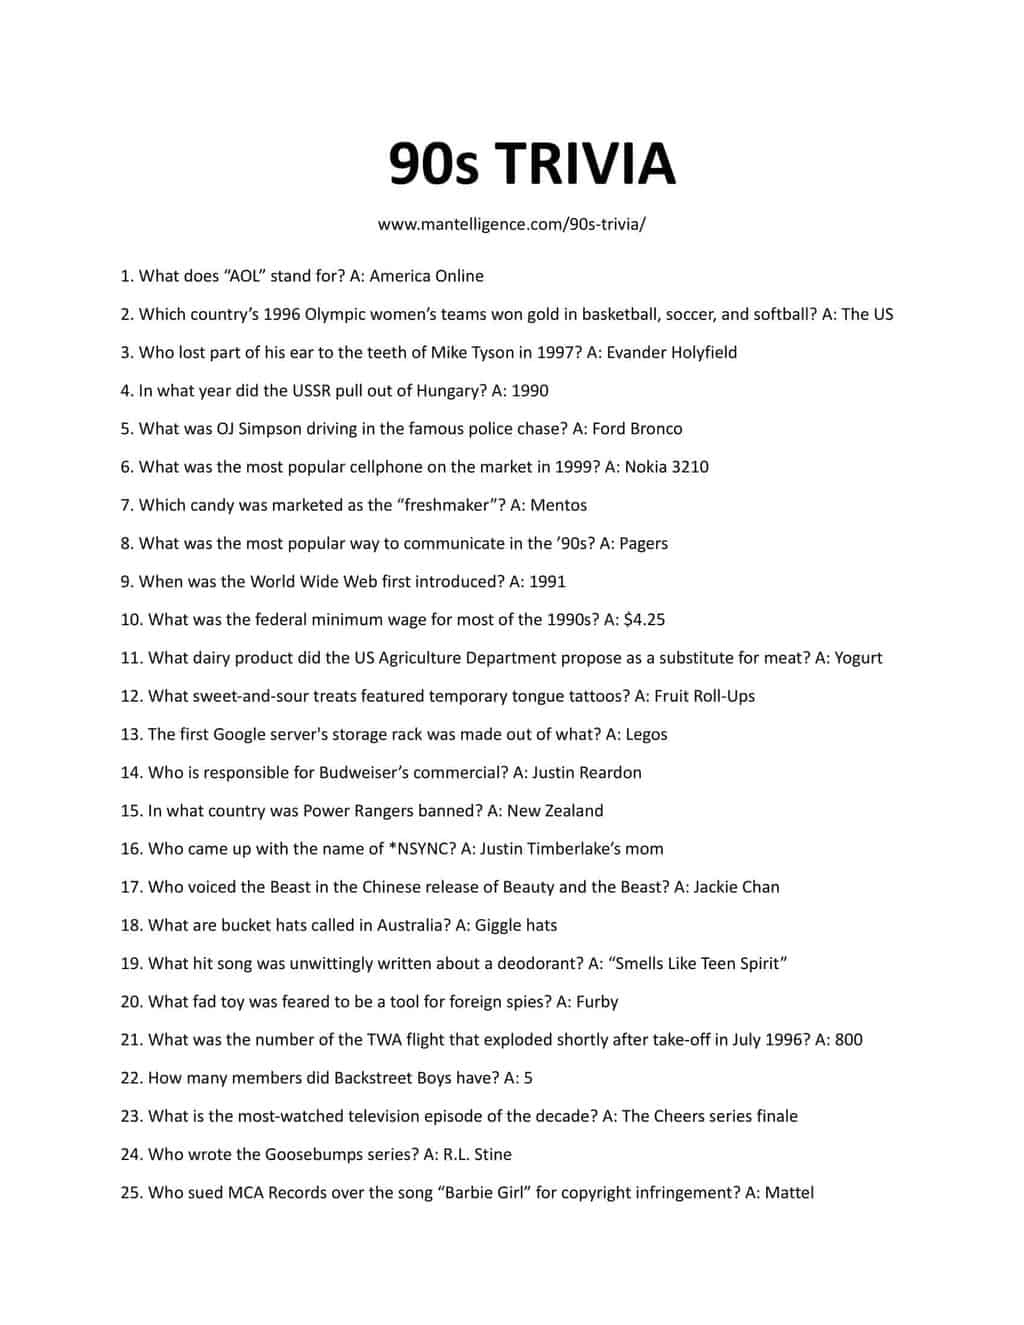 90s Movie Trivia Questions And Answers